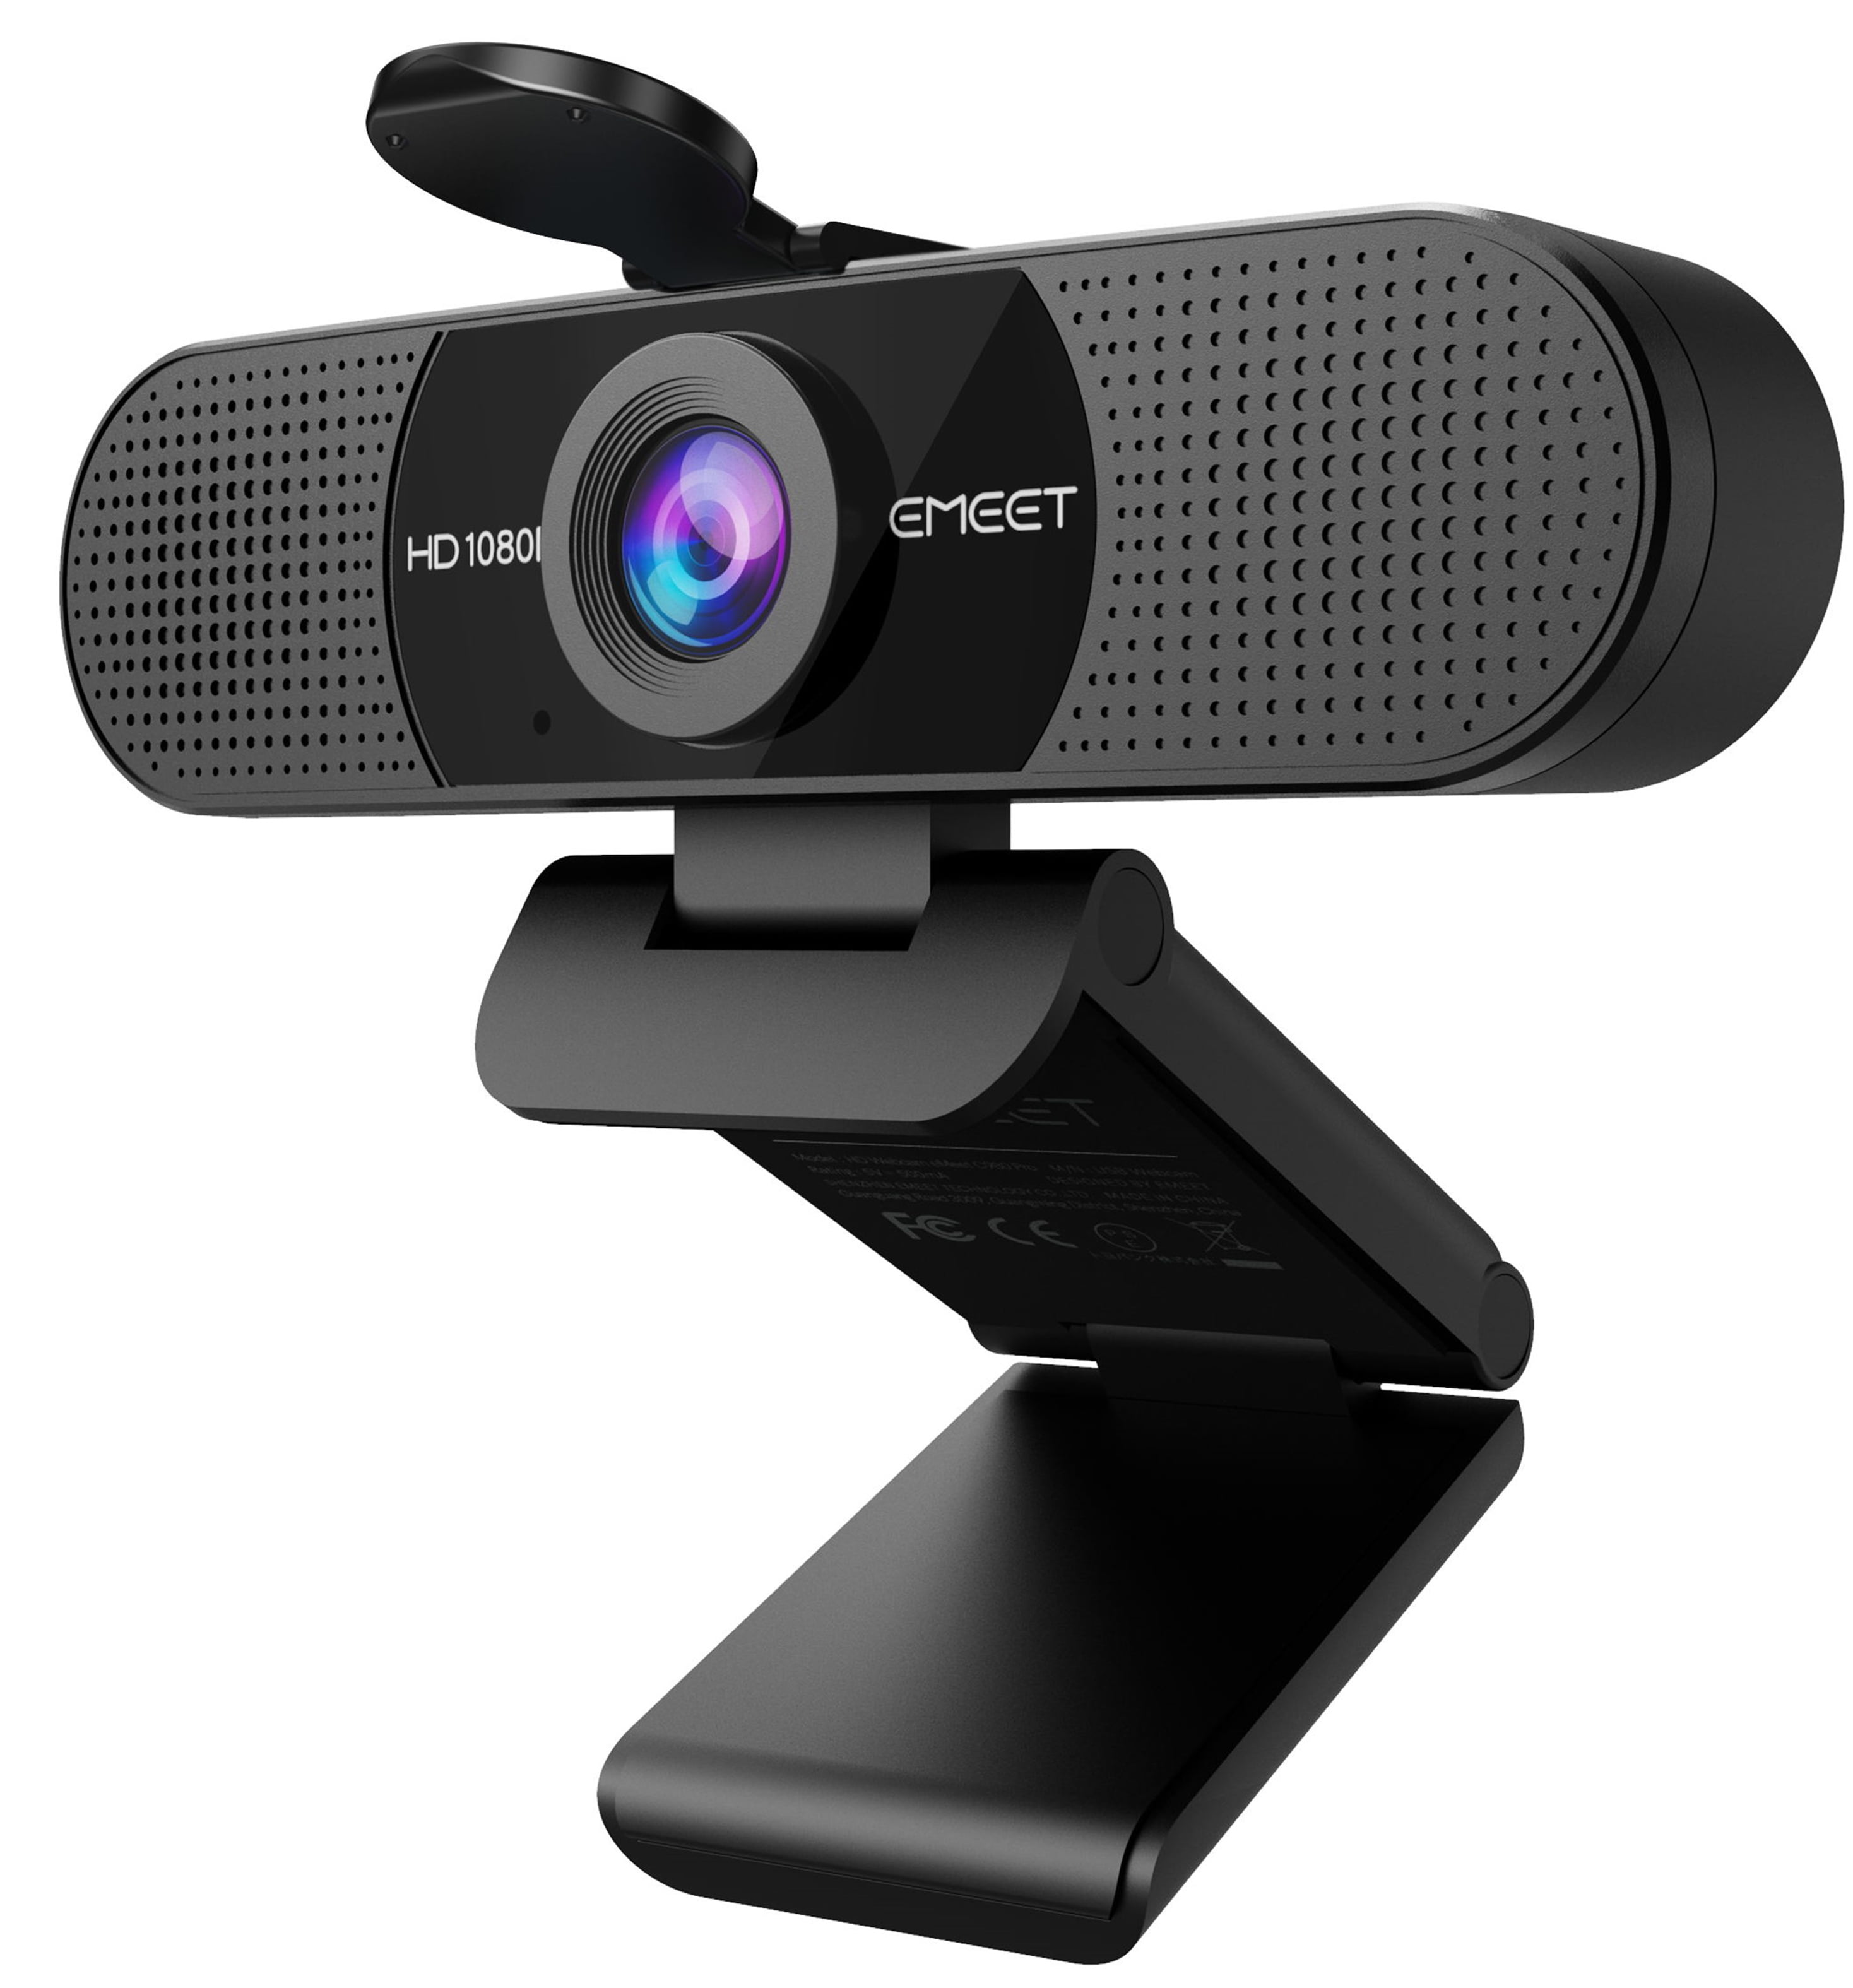  EMEET 3 in 1 Webcam - 1080P Webcam with Microphone and  Speakers, Noise Reduction, Auto Low Light Correction W/Cover, C980 Pro USB  Camera Webcam 65°-90° for Video Conferencing Streaming/Gaming/Class :  Electronics